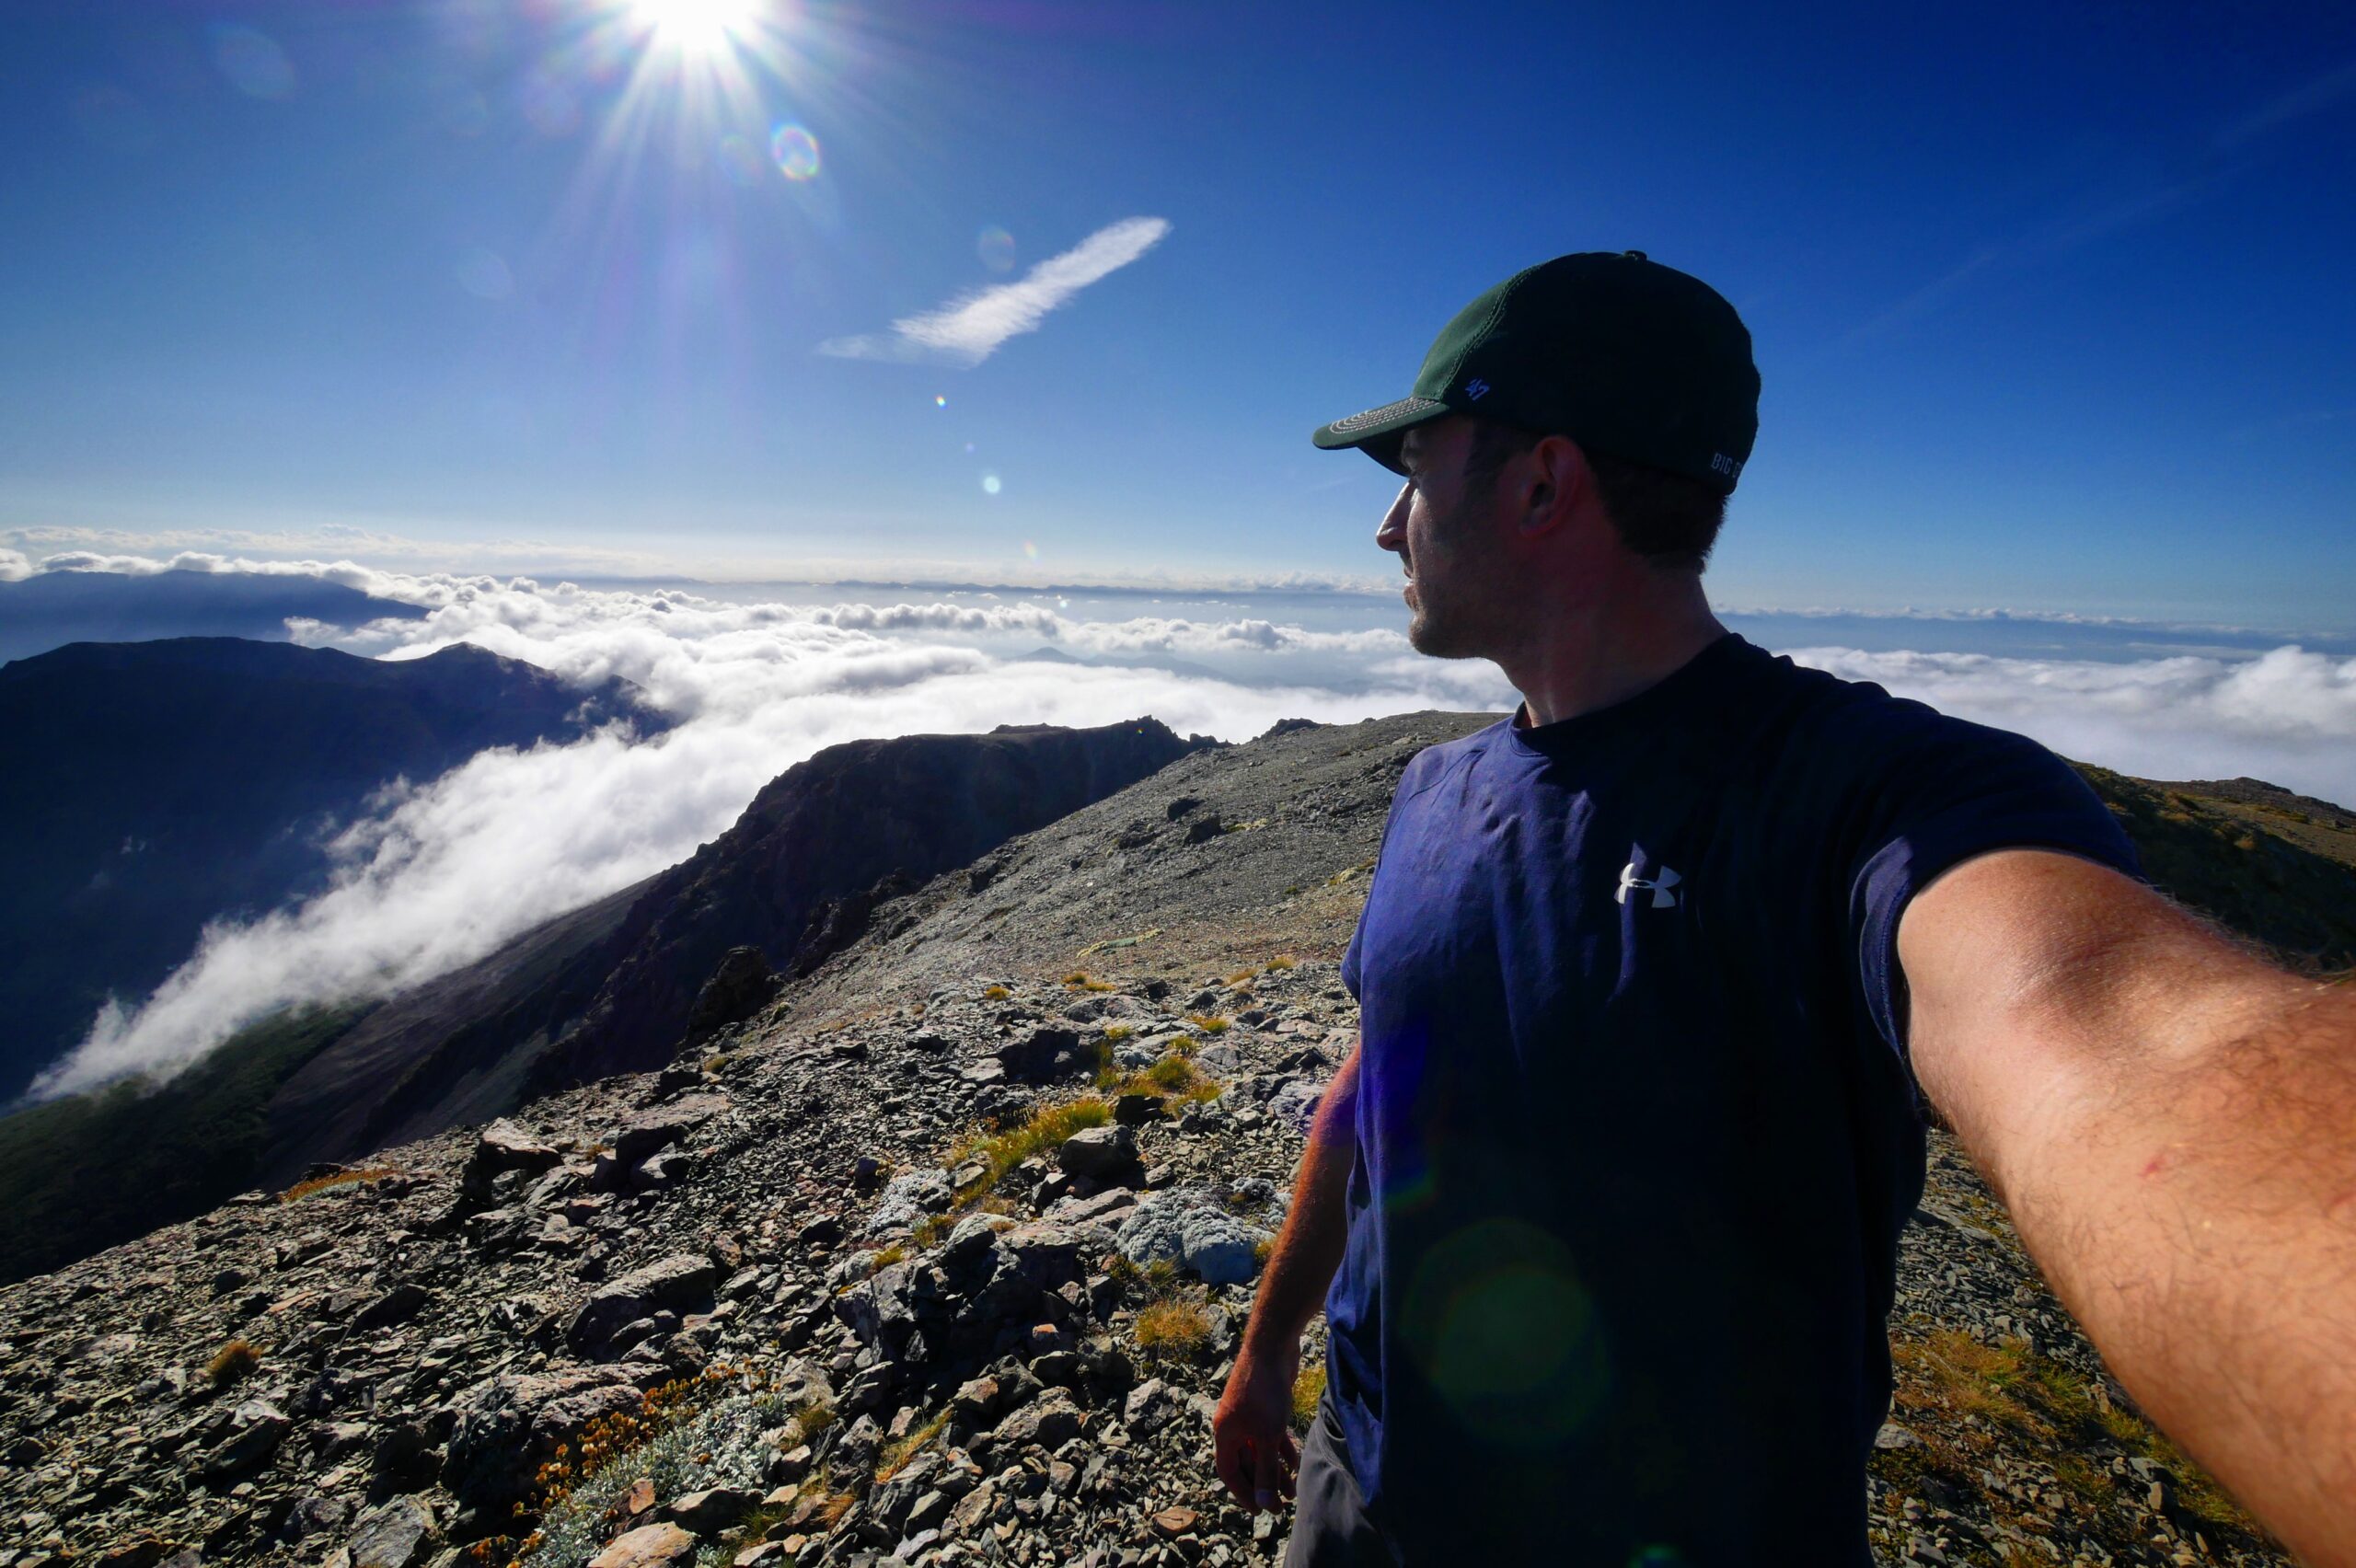 Hank admires the view above the clouds from the top of Mount Rintoul in New Zealand's Richmond Range.